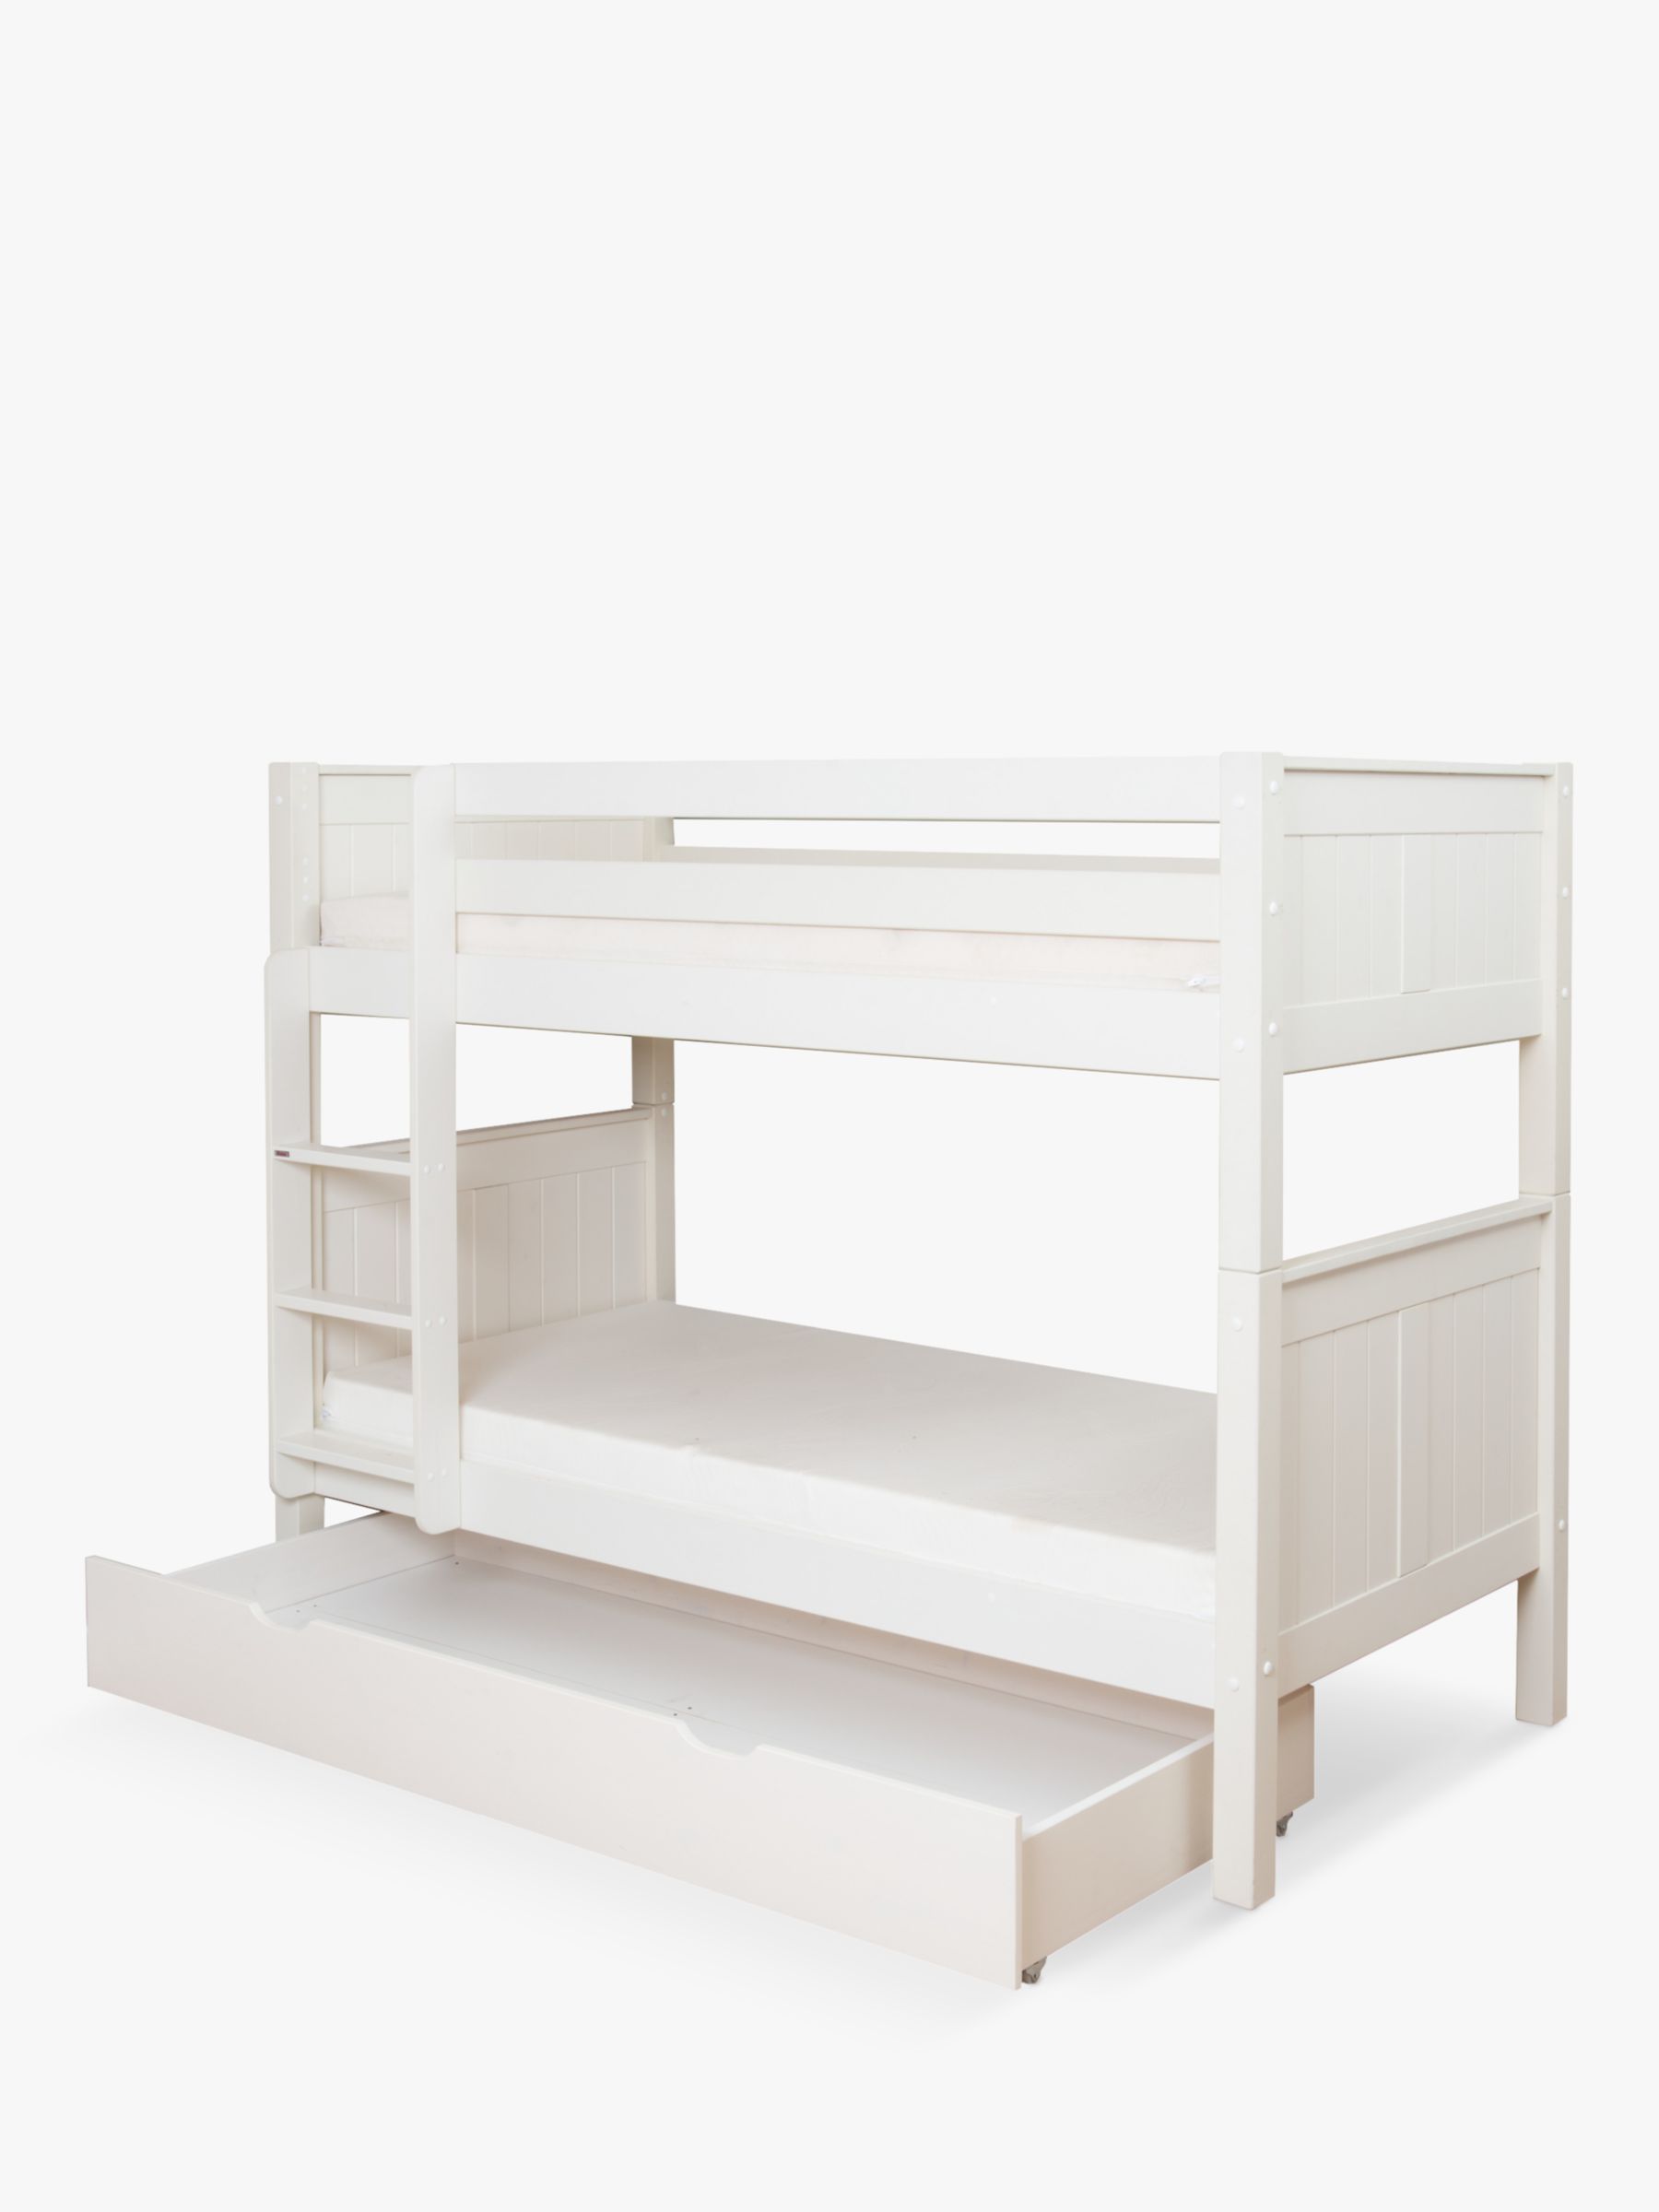 Stompa Classic Child Compliant Bunk Bed, Small Bunk Bed With Trundle